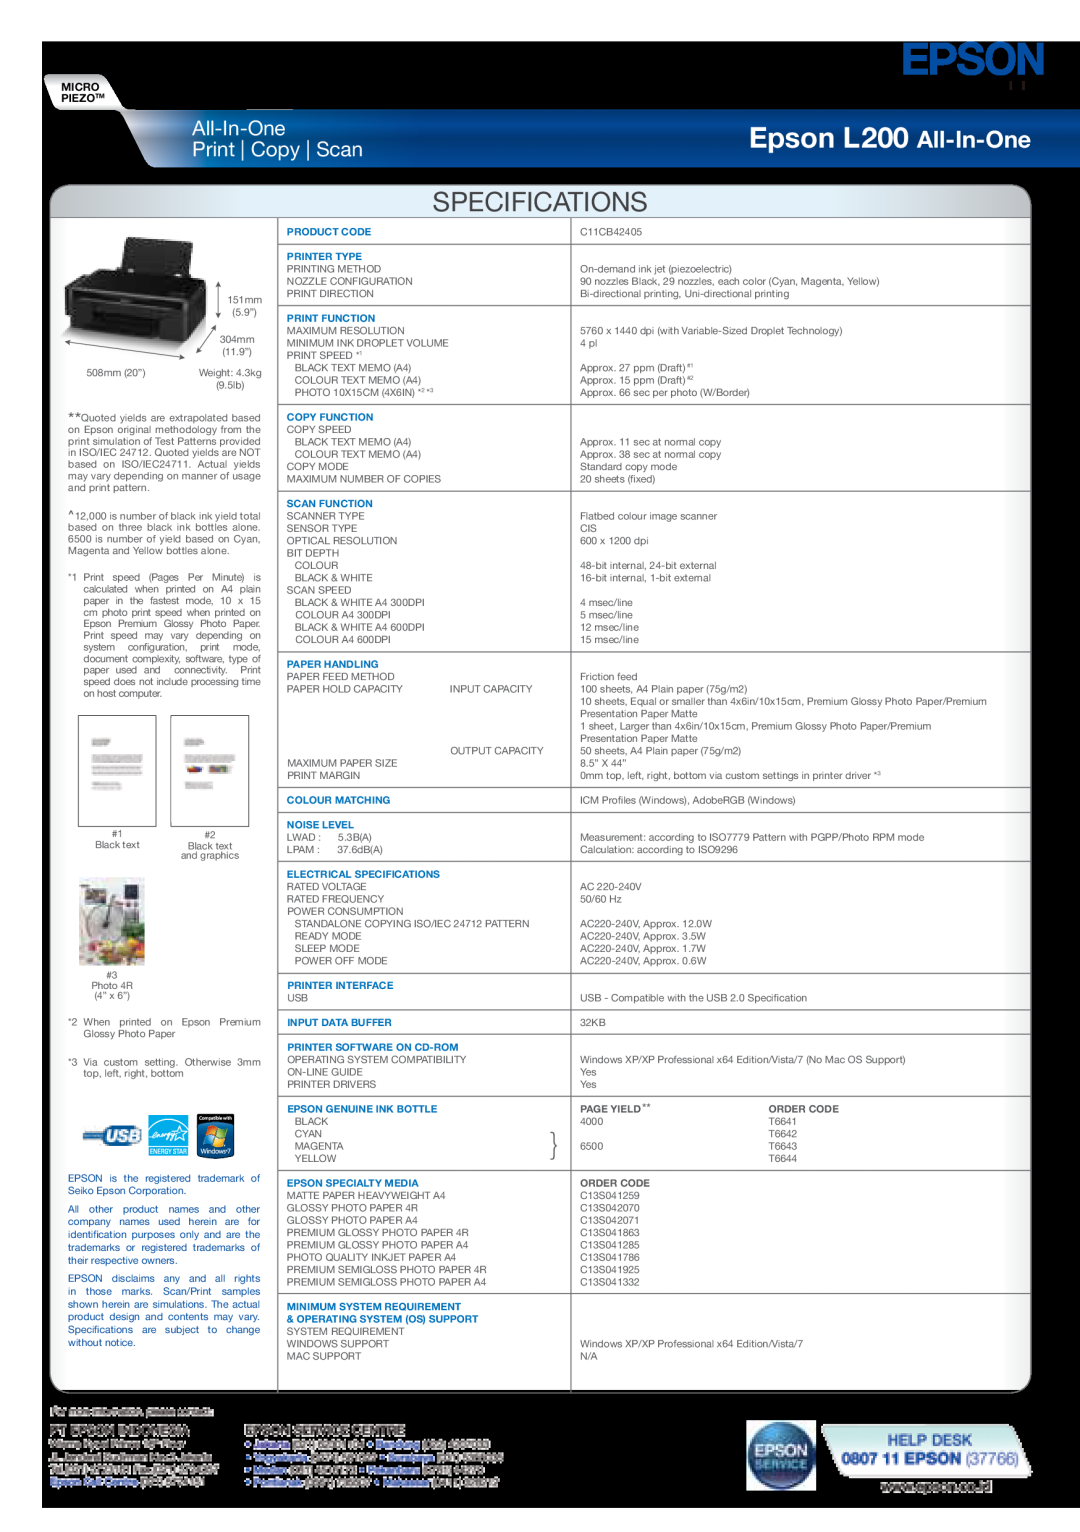 Epson warranty Epson L200 All-In-One, Specifications, Print Copy Scan, Micro Piezotm, Page Yield, Order CodE 